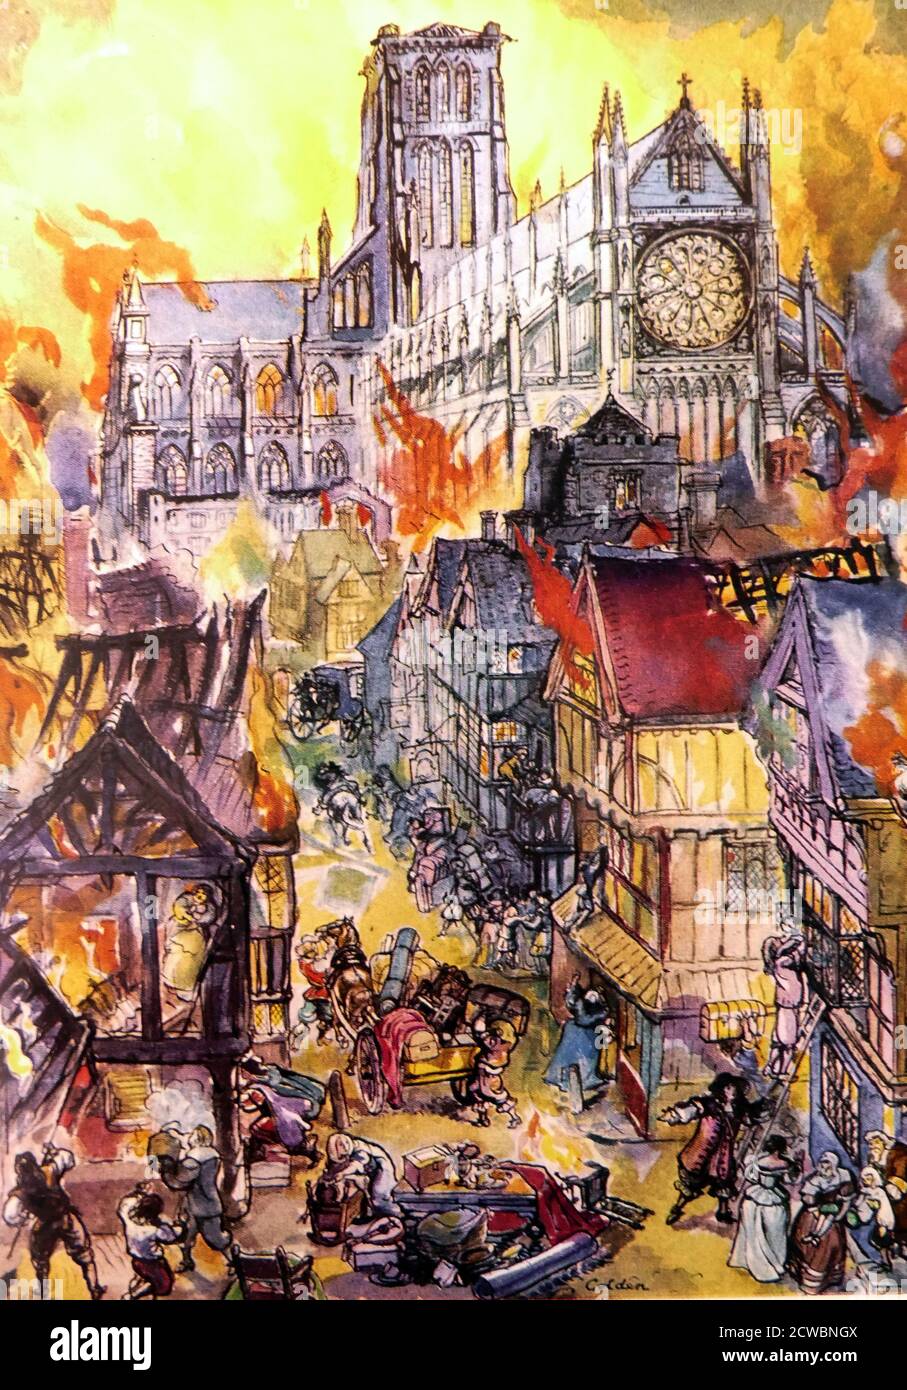 Illustration showing The Great Fire of London swept through the central parts of the English city from Sunday, 2 September to Thursday, 6 September 1666. The fire gutted the medieval City of London inside the old Roman city wall. It threatened but did not reach the Westminster, Charles II's Palace of Whitehall, or most of the suburban slums. It destroyed 13,200 house. It is estimated to have destroyed the homes of 70,000 of the city's 80,000 inhabitants Stock Photo